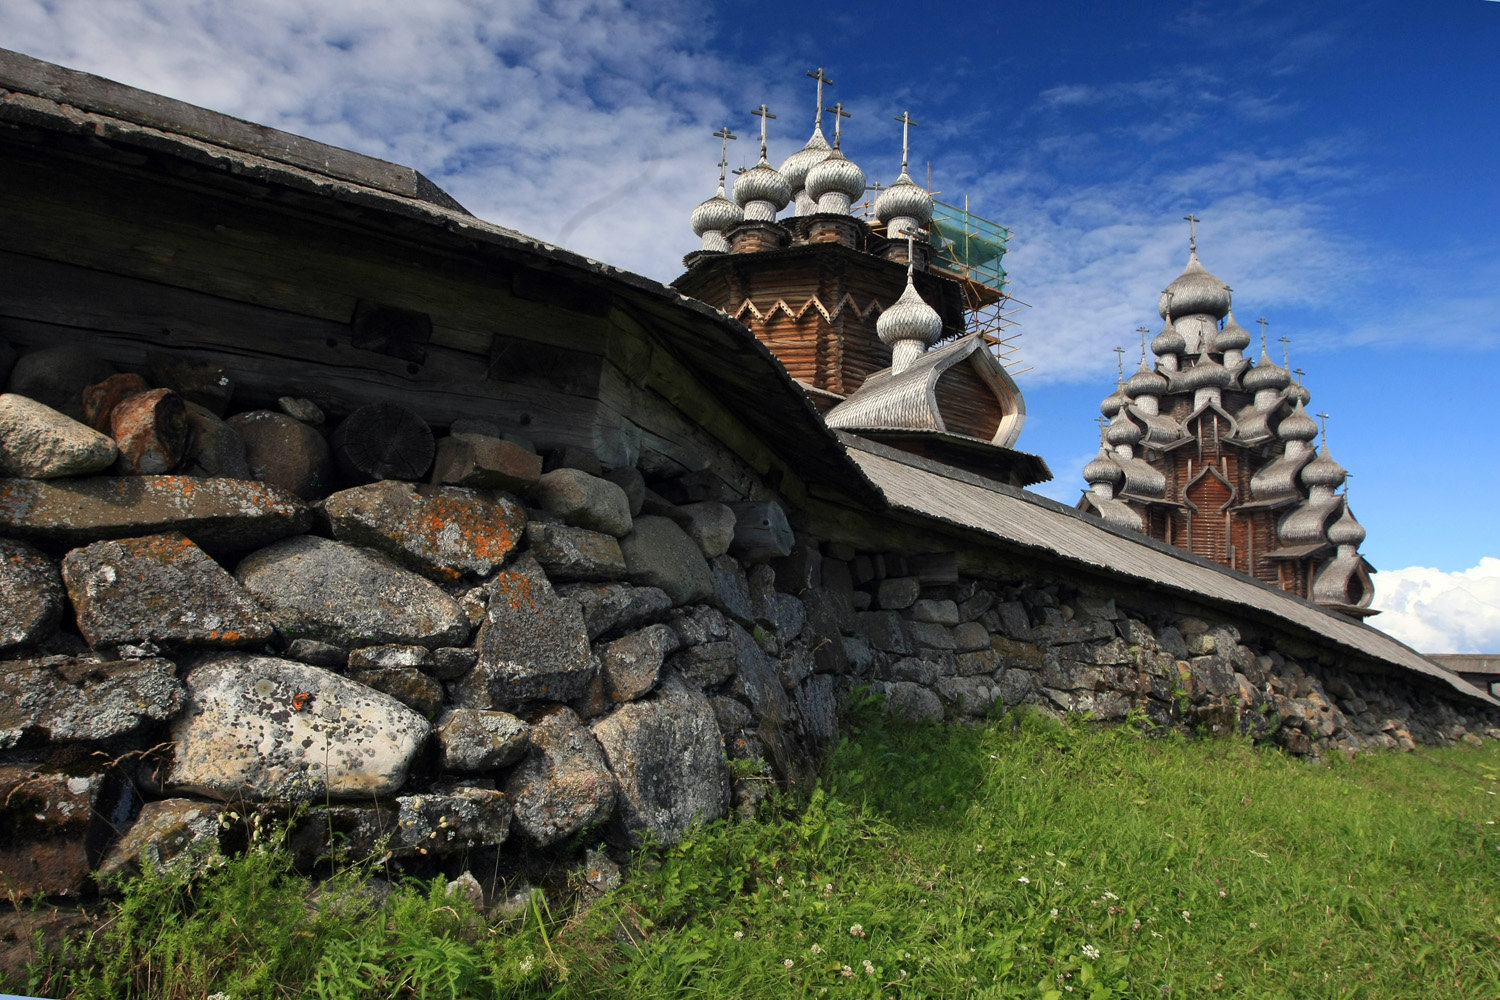 The Kizhi State History, Architecture and Ethnography Museum and Protected Nature Area